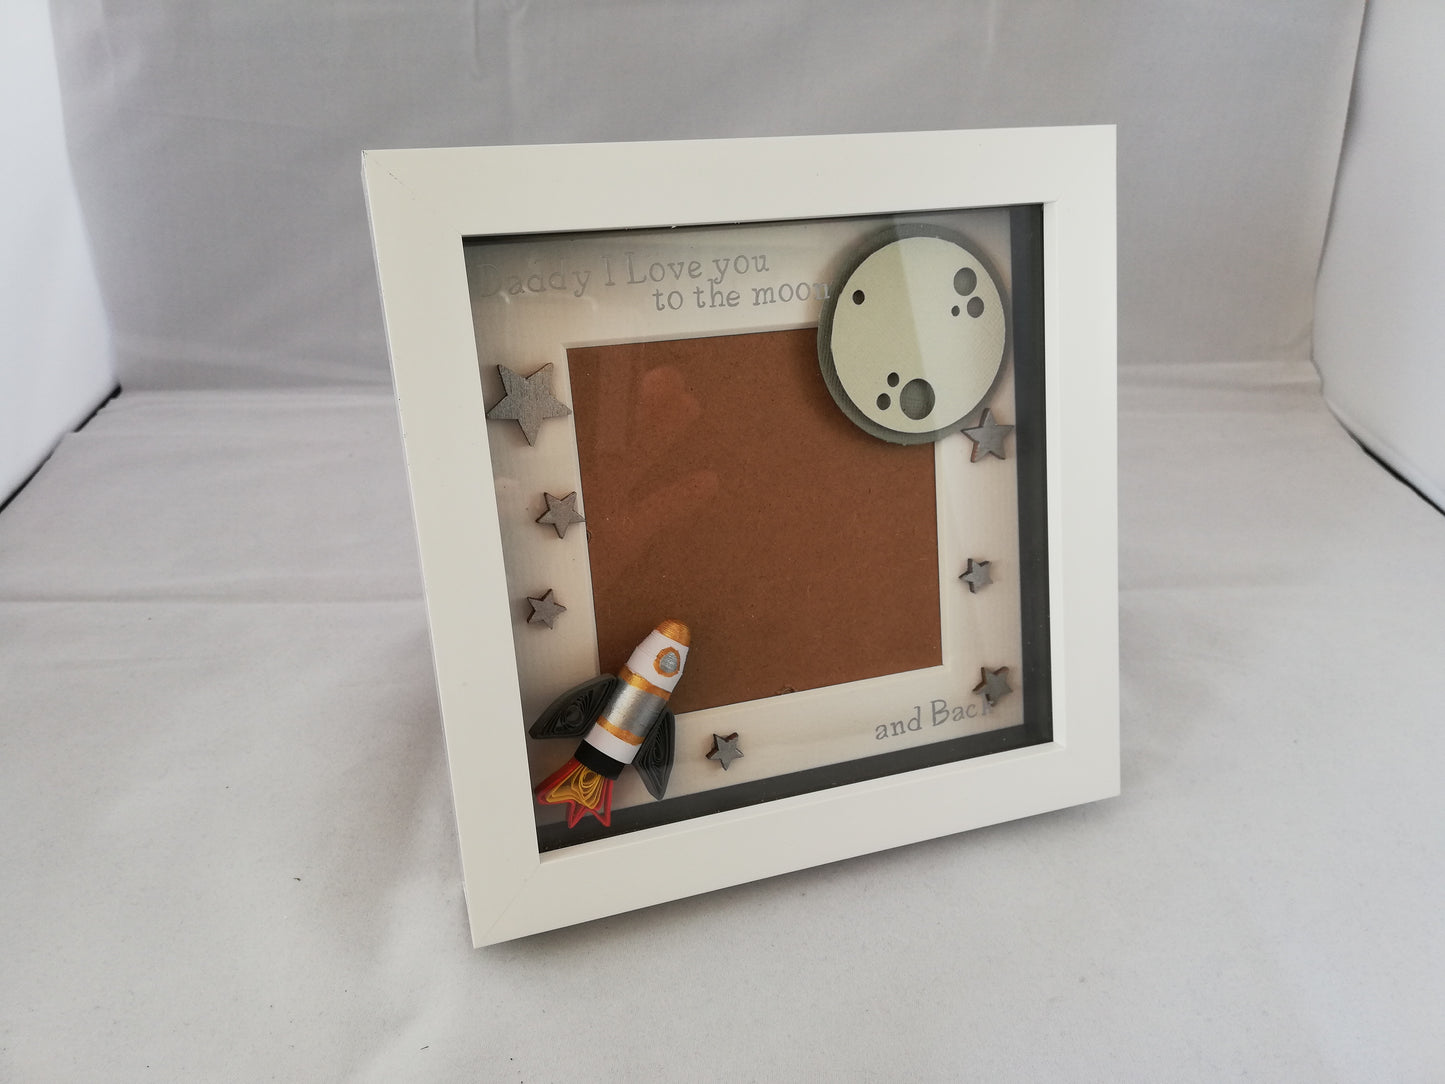 Love you to the moon & back photo frame